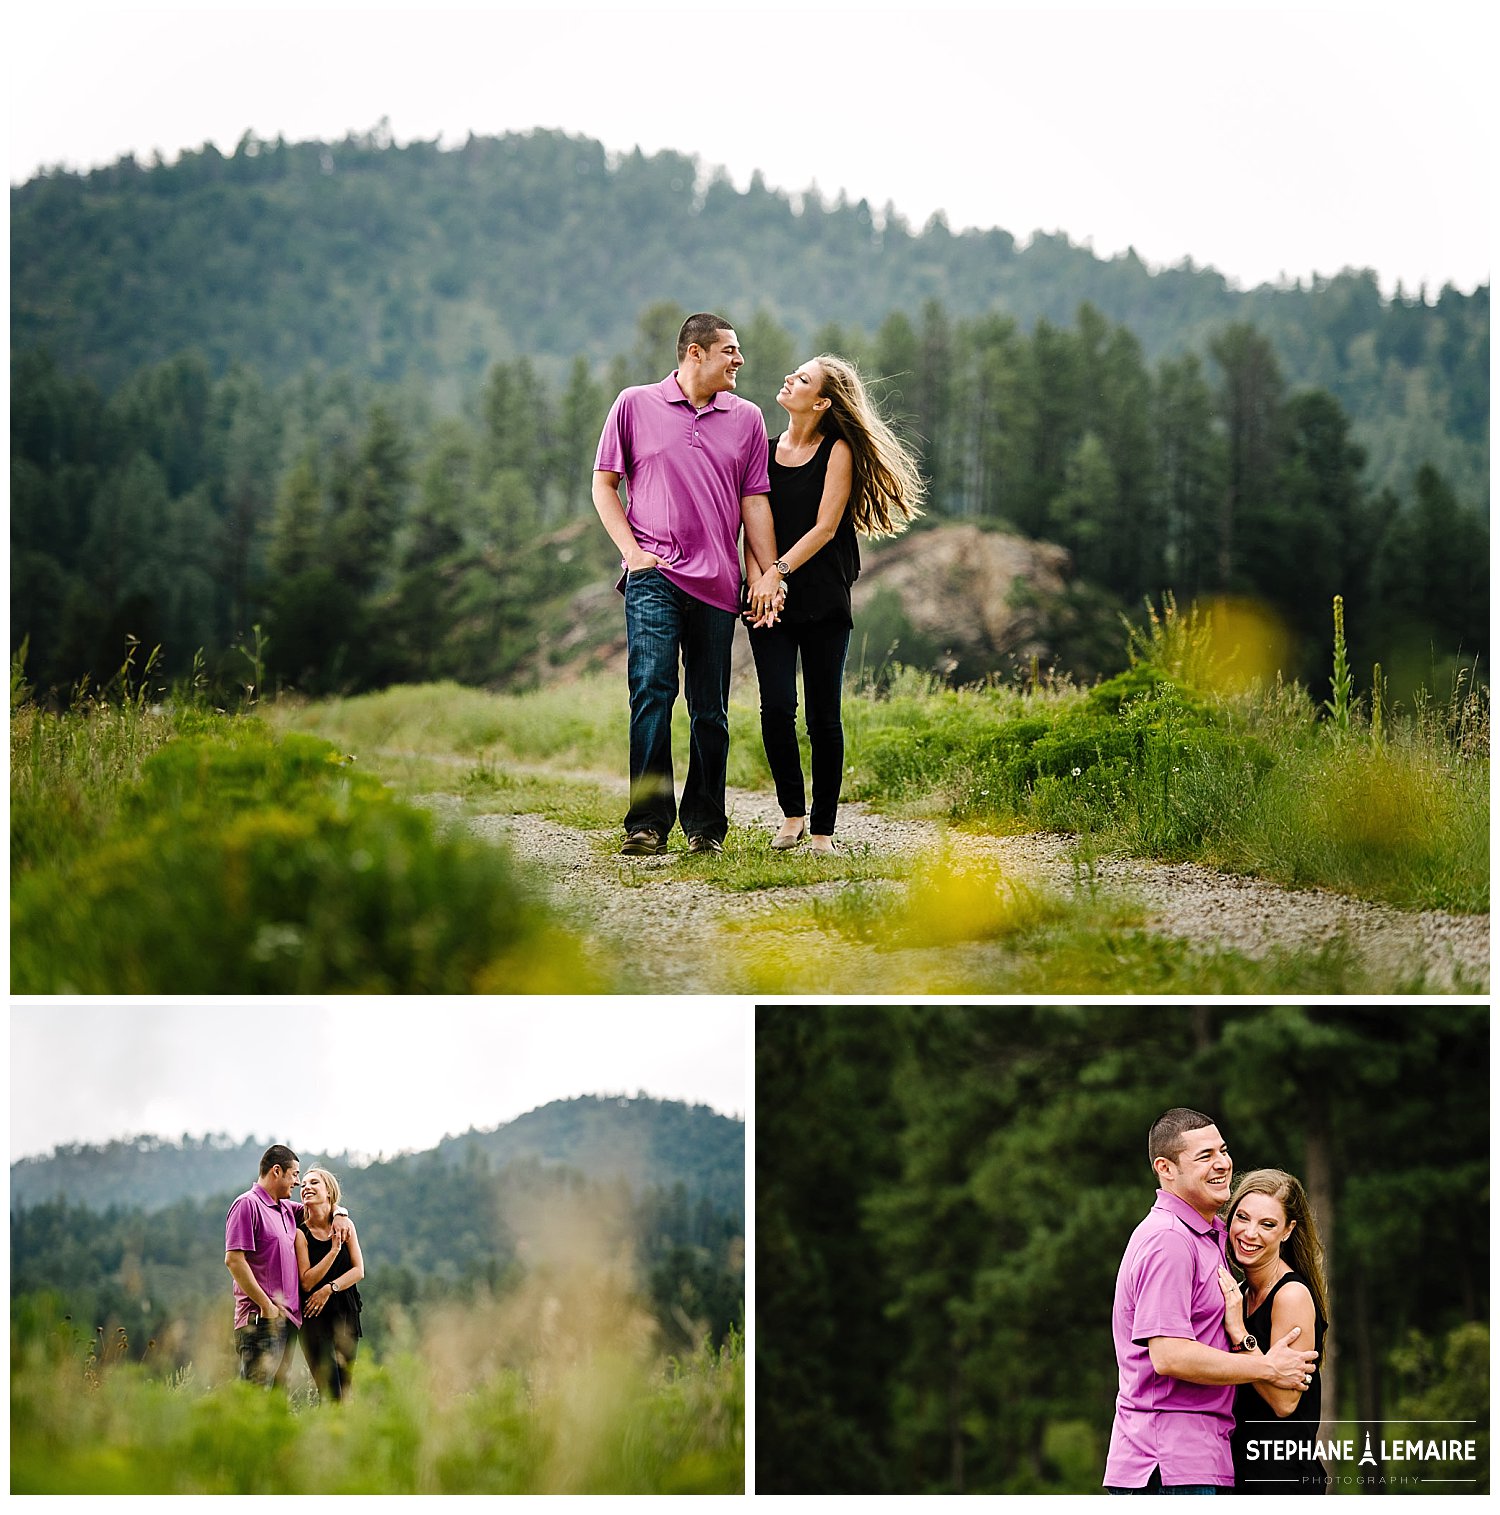 Ruidoso engagement pictures in the mountains. Couple is walking on a dirt road.